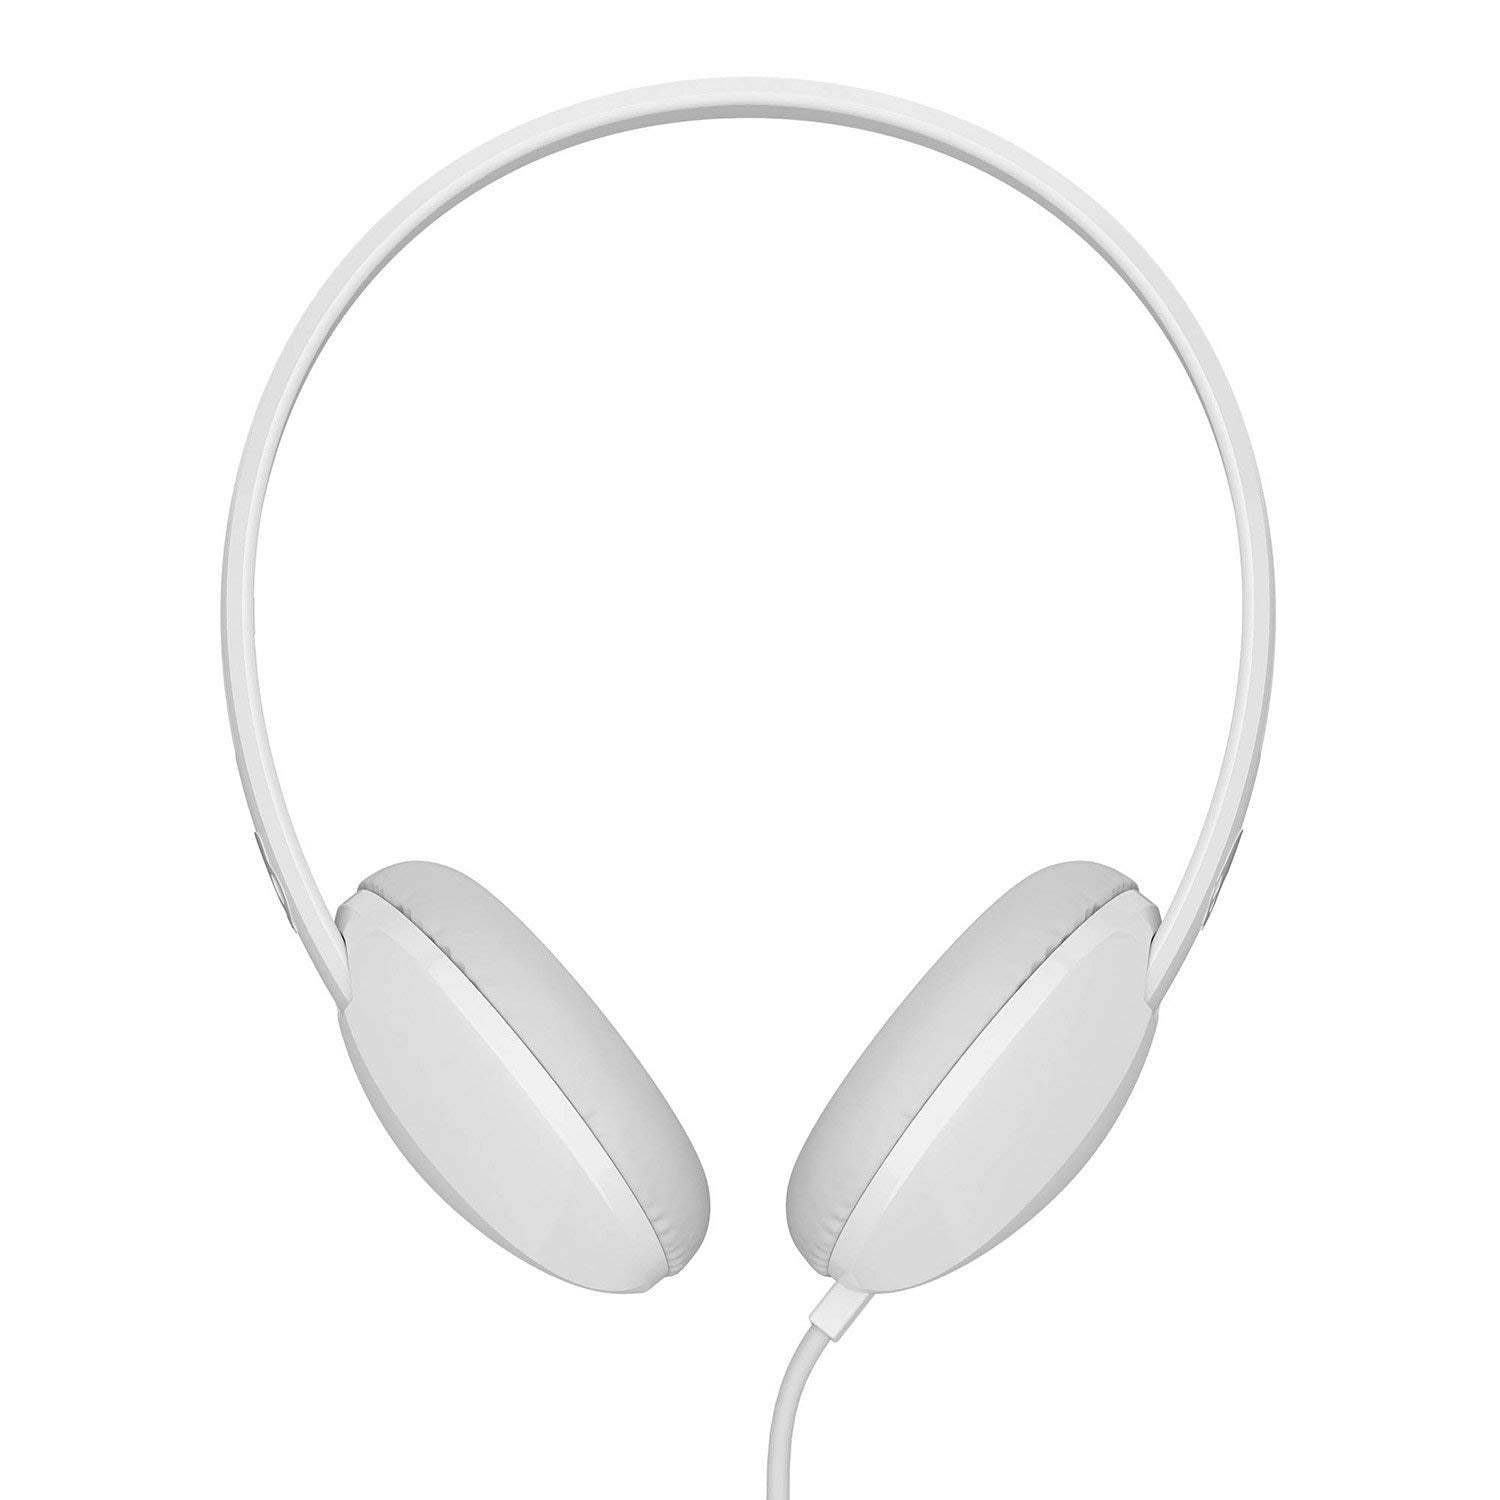 Skullcandy Headphones With Built In Microphone Stim On Ear White Grey